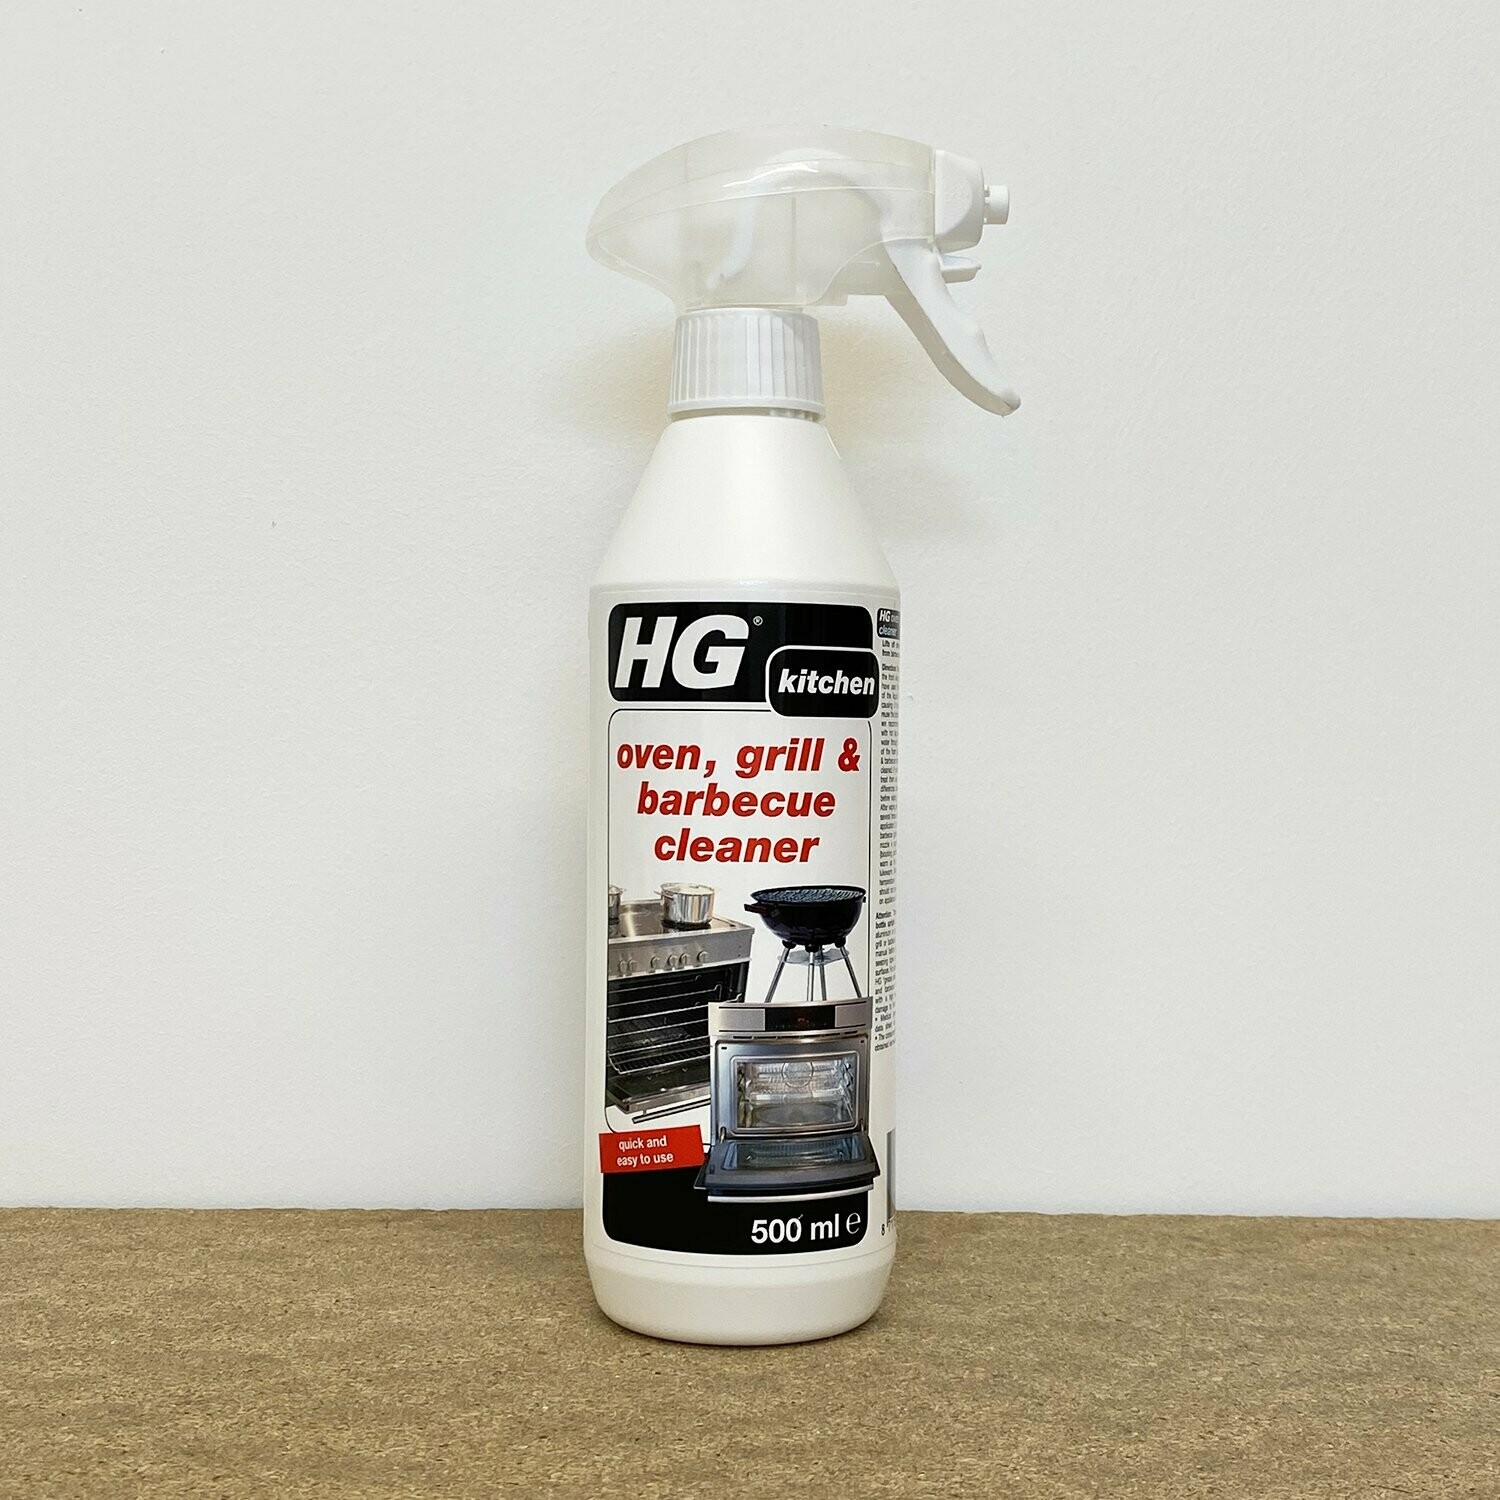 HG oven grill & barbecue cleaner